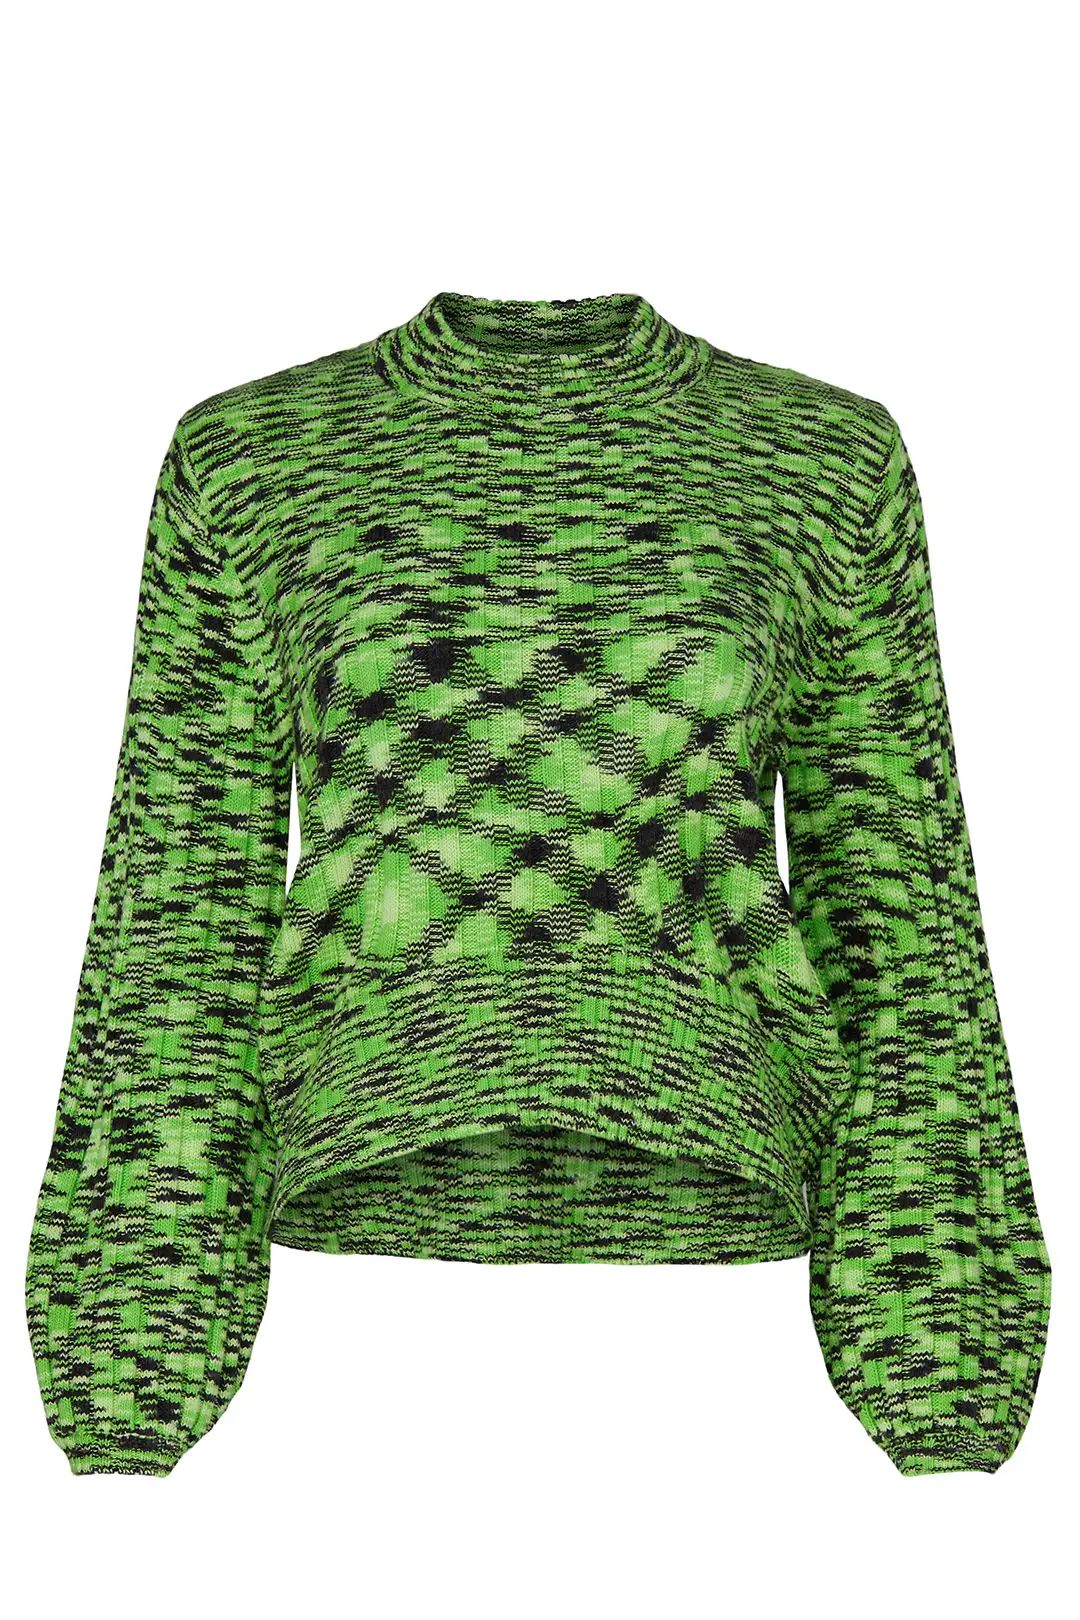 BlankNYC The Clash Sweater | Rent The Runway